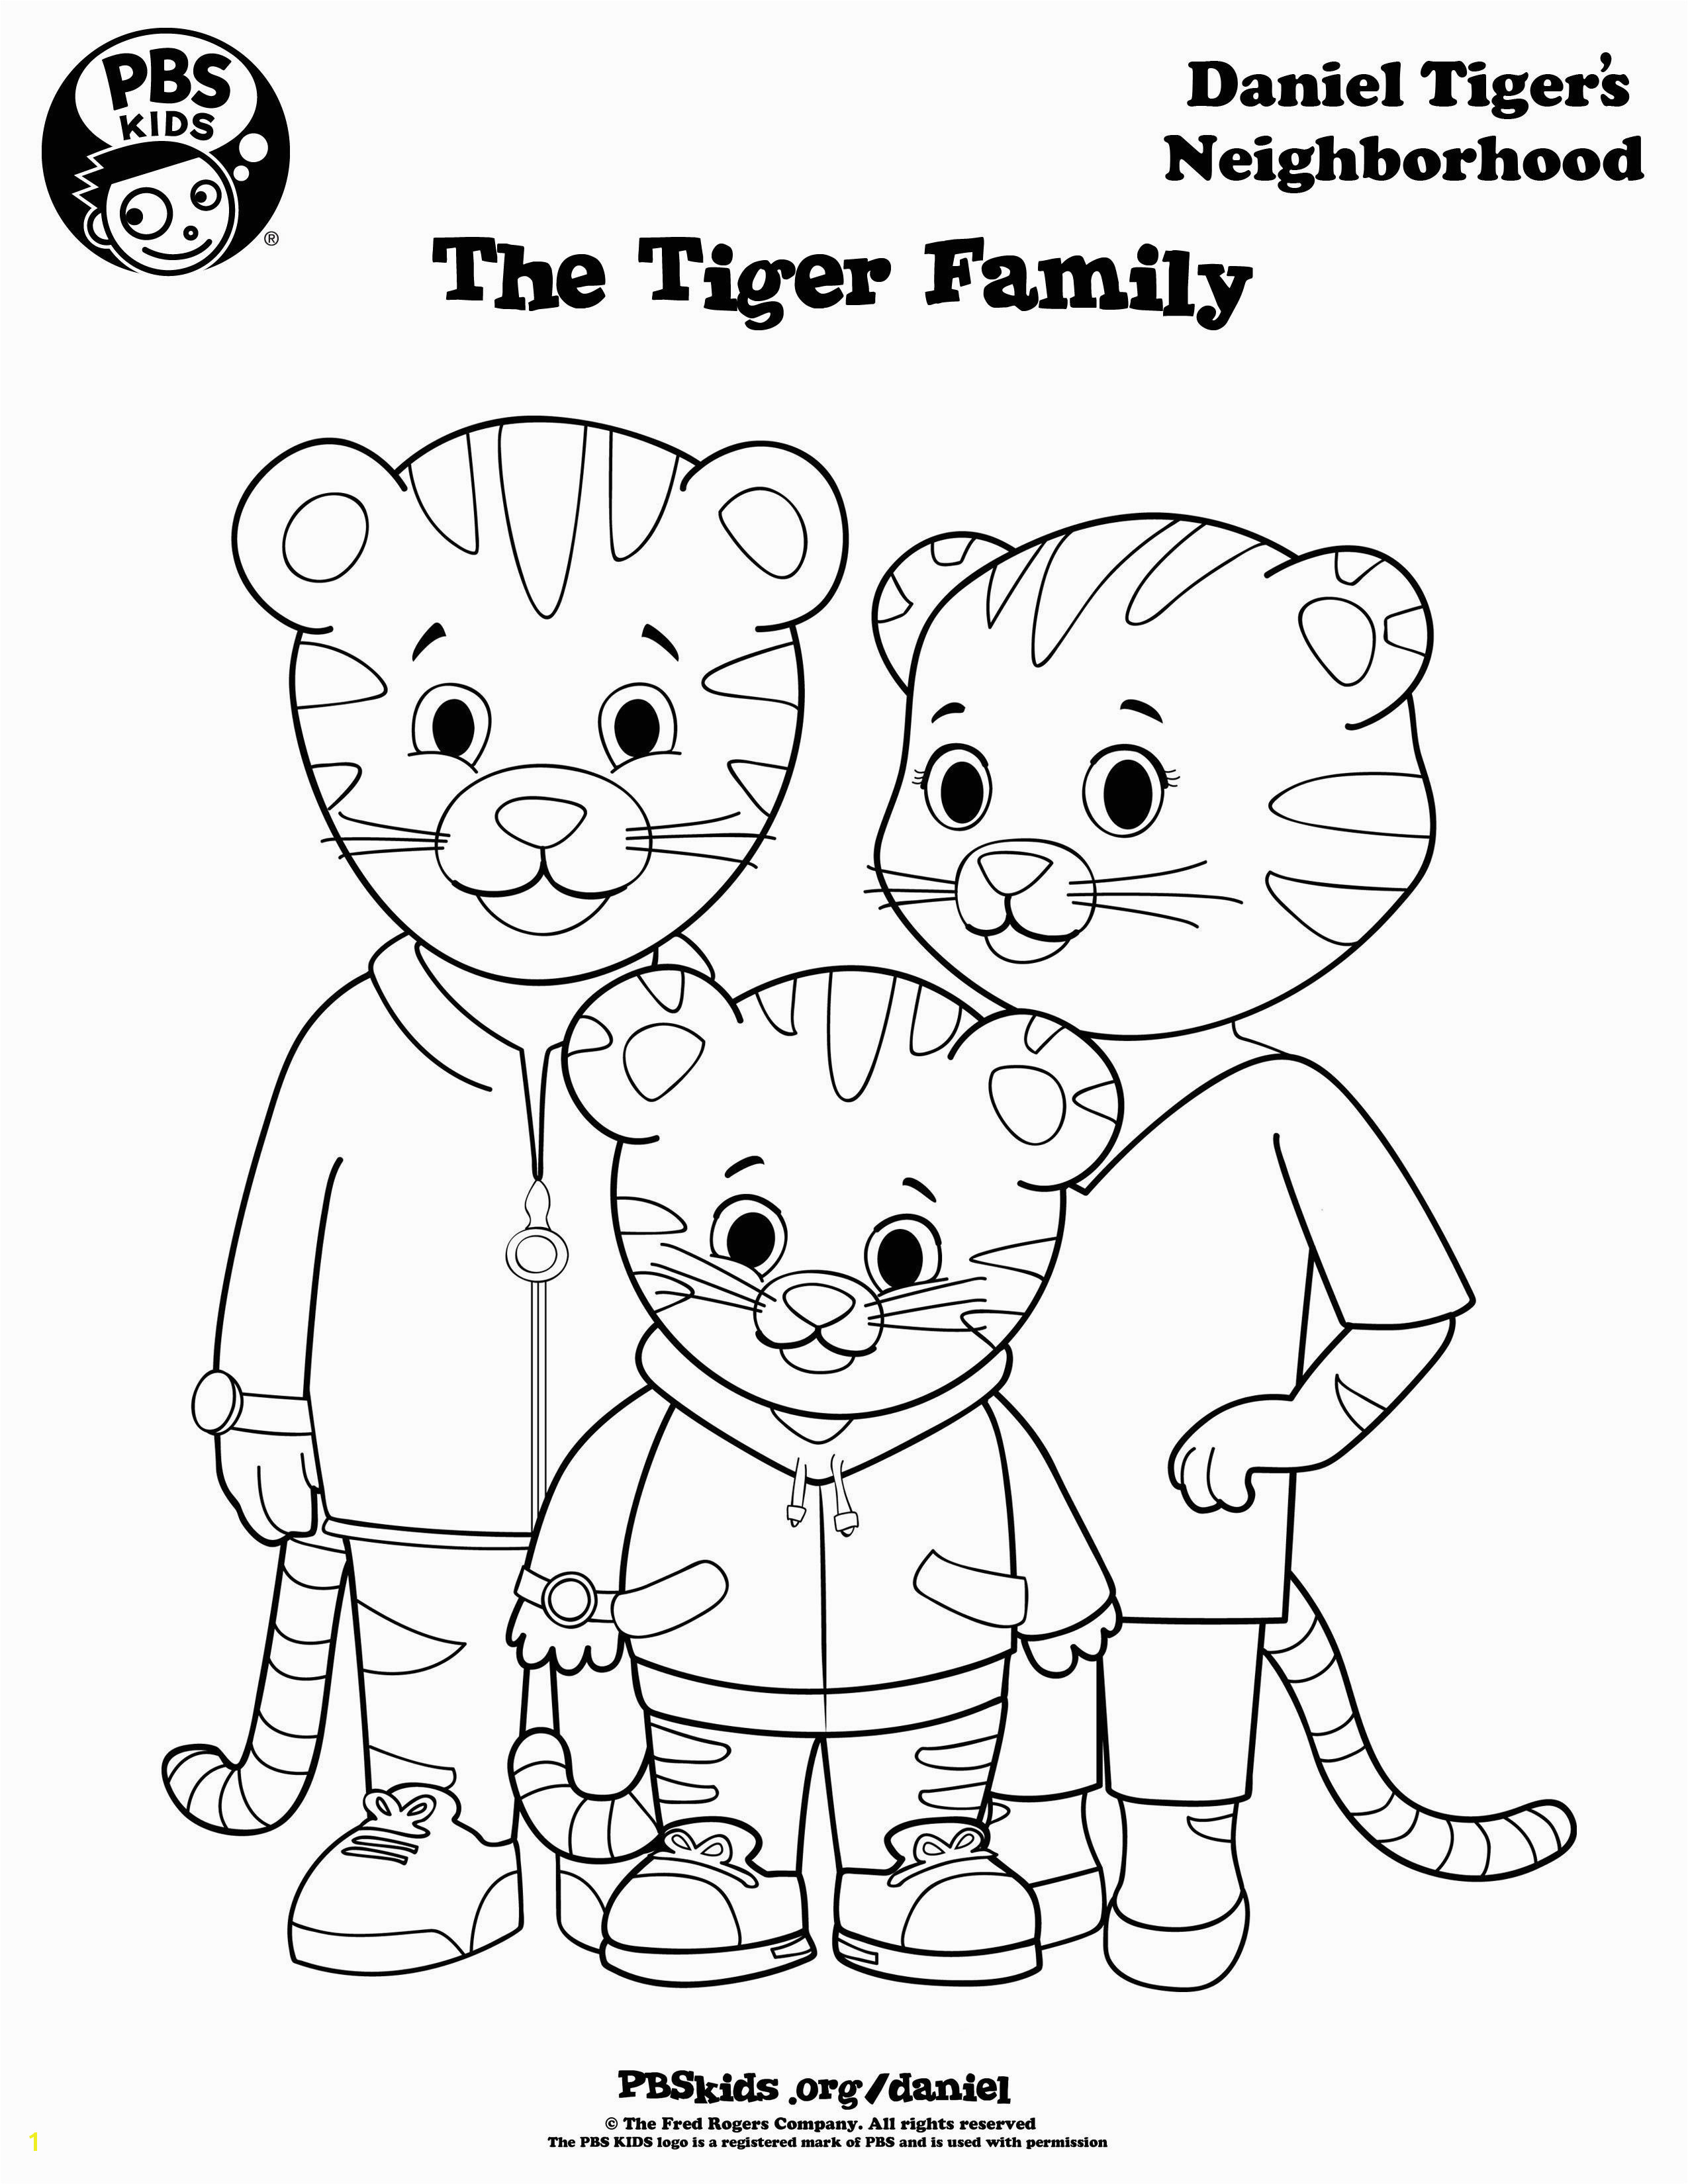 Daniel Tiger Coloring Pages Printable Print Out Grr Rific Coloring Pages for Your Weekend Adventures